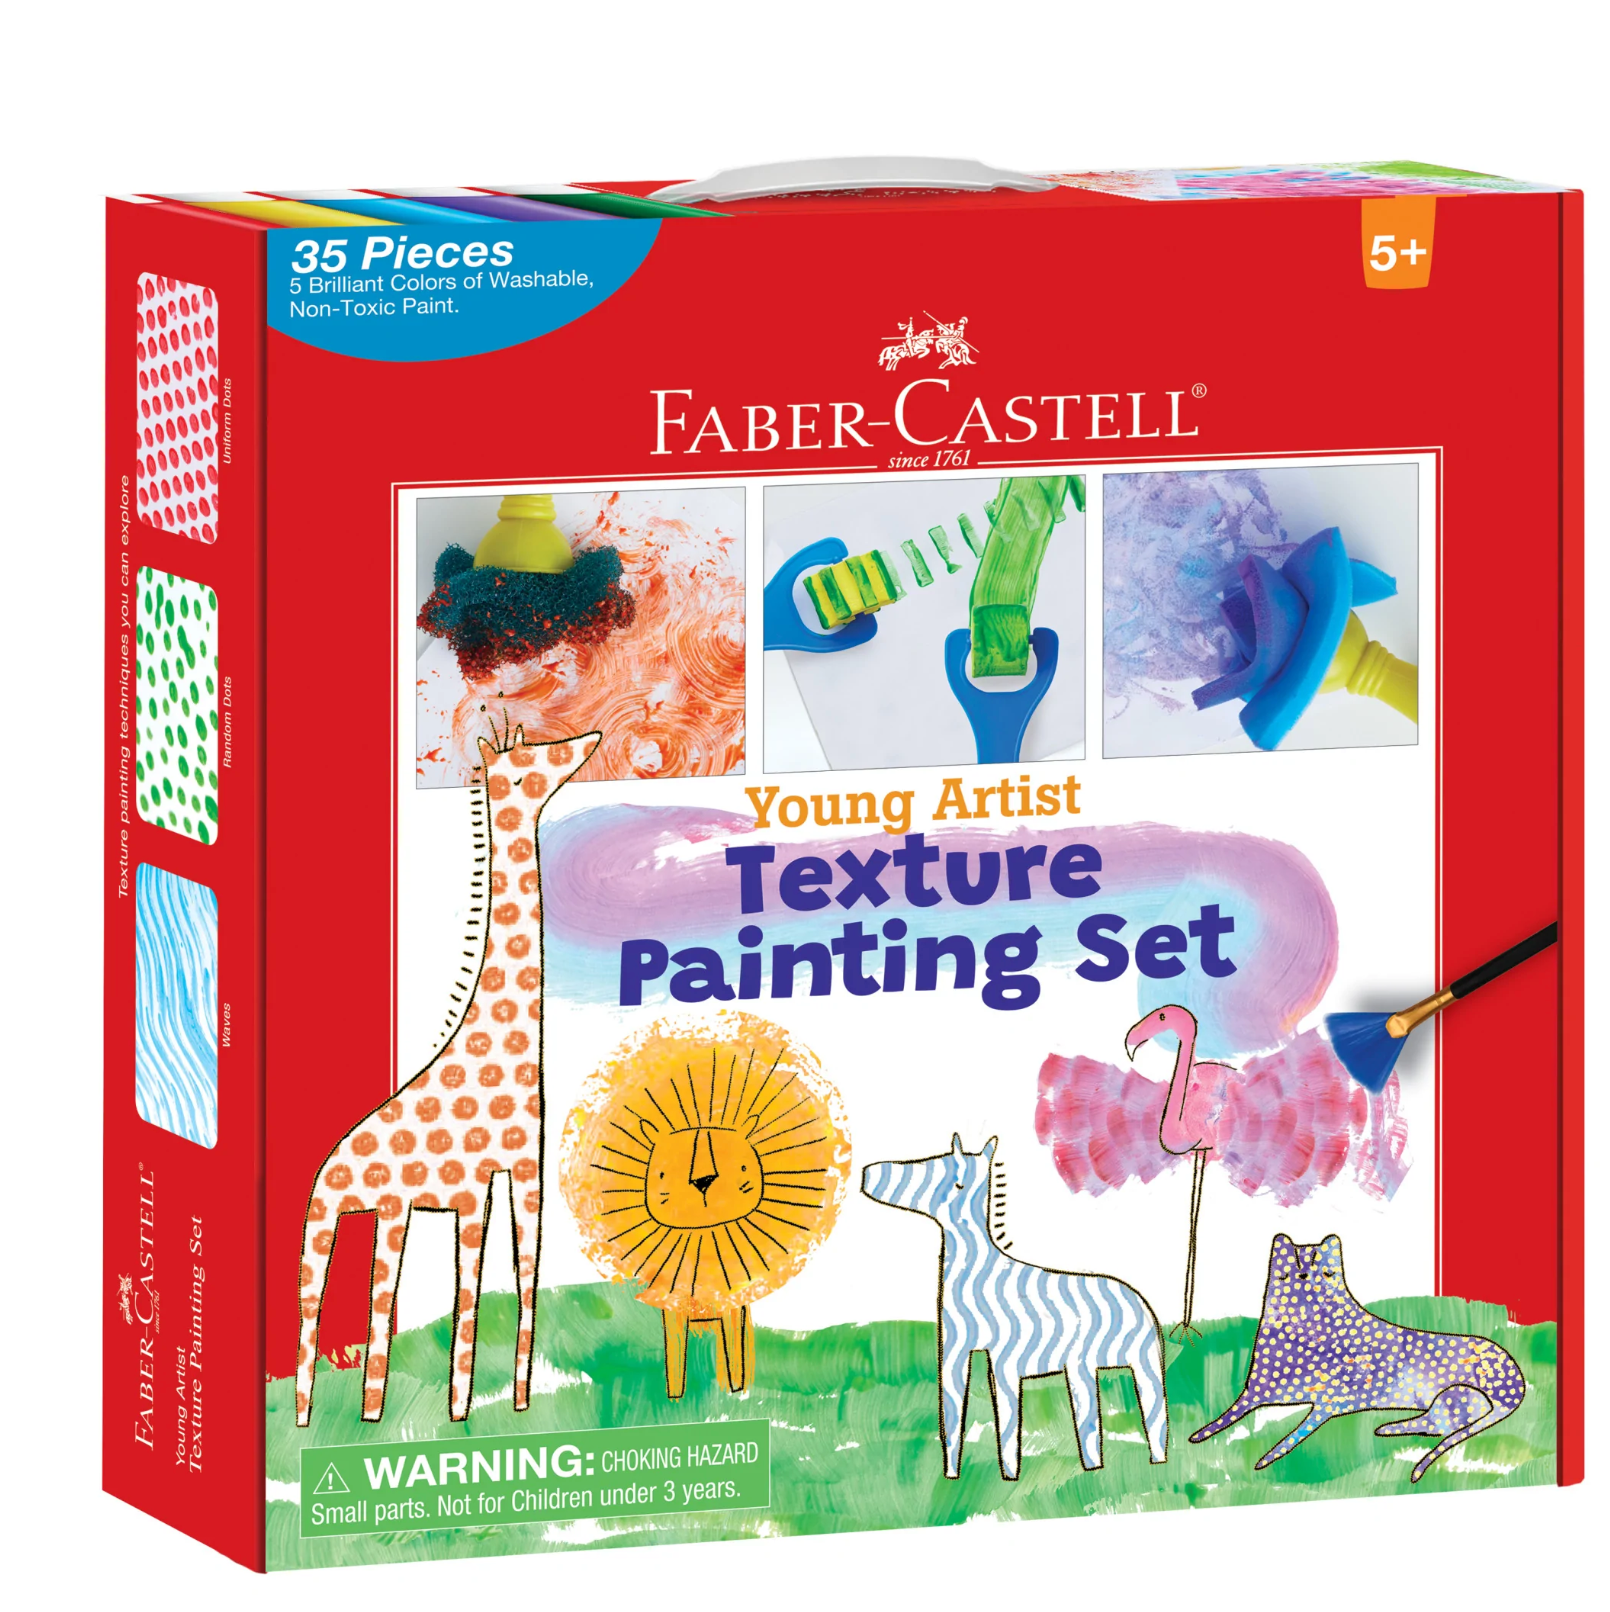 Young Artist Texture Painting Kit